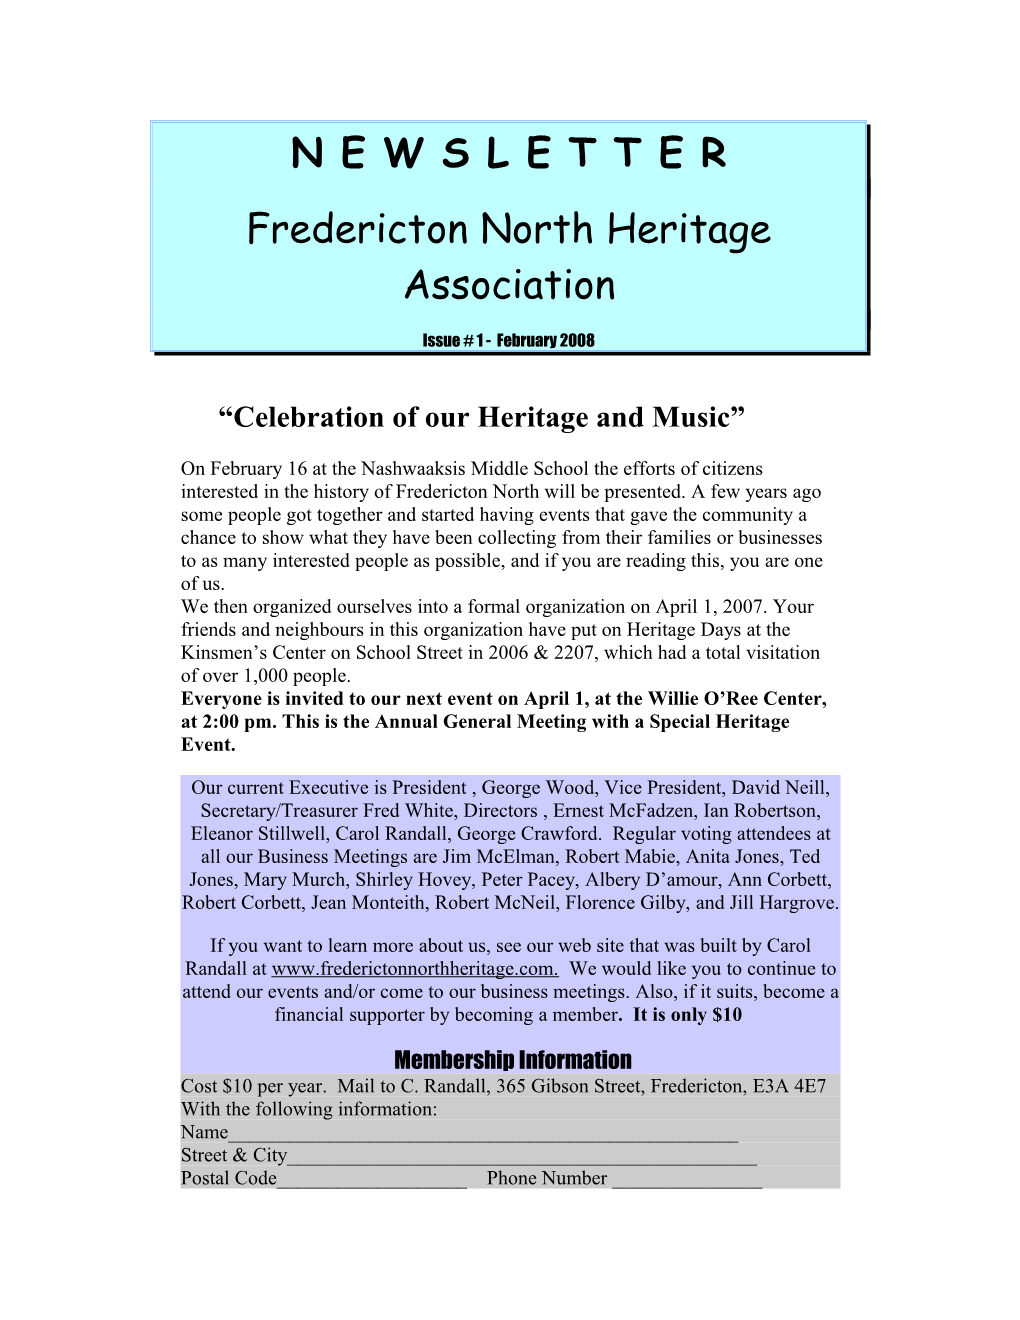 Celebration of Our Heritage and Music